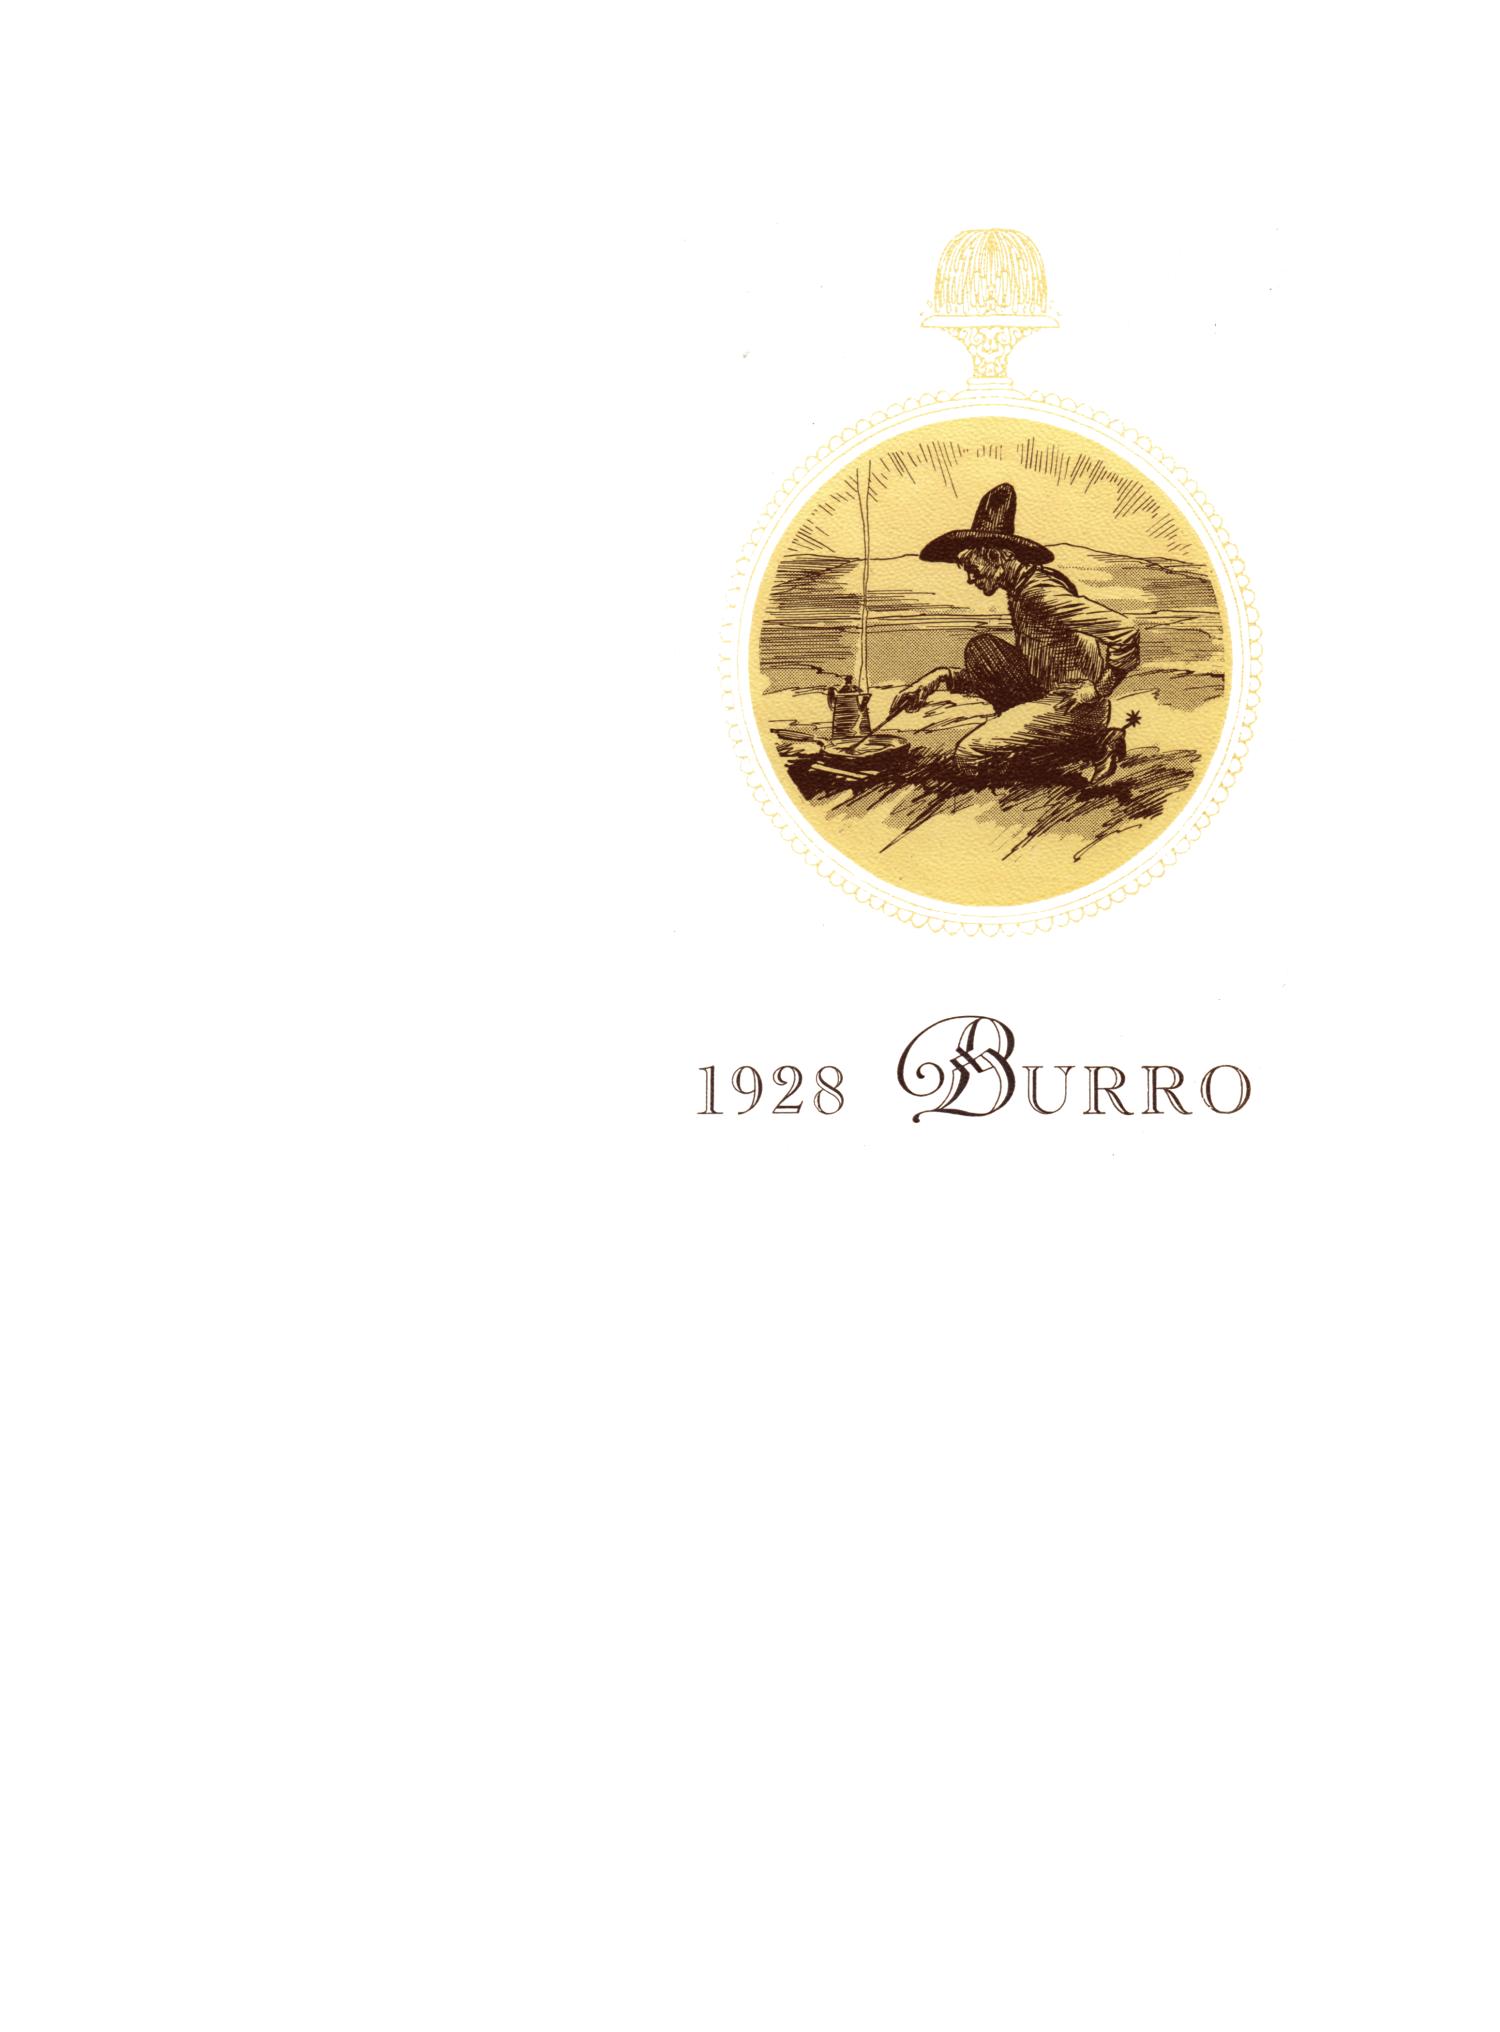 The Burro, Yearbook of Mineral Wells High School, 1928
                                                
                                                    3
                                                